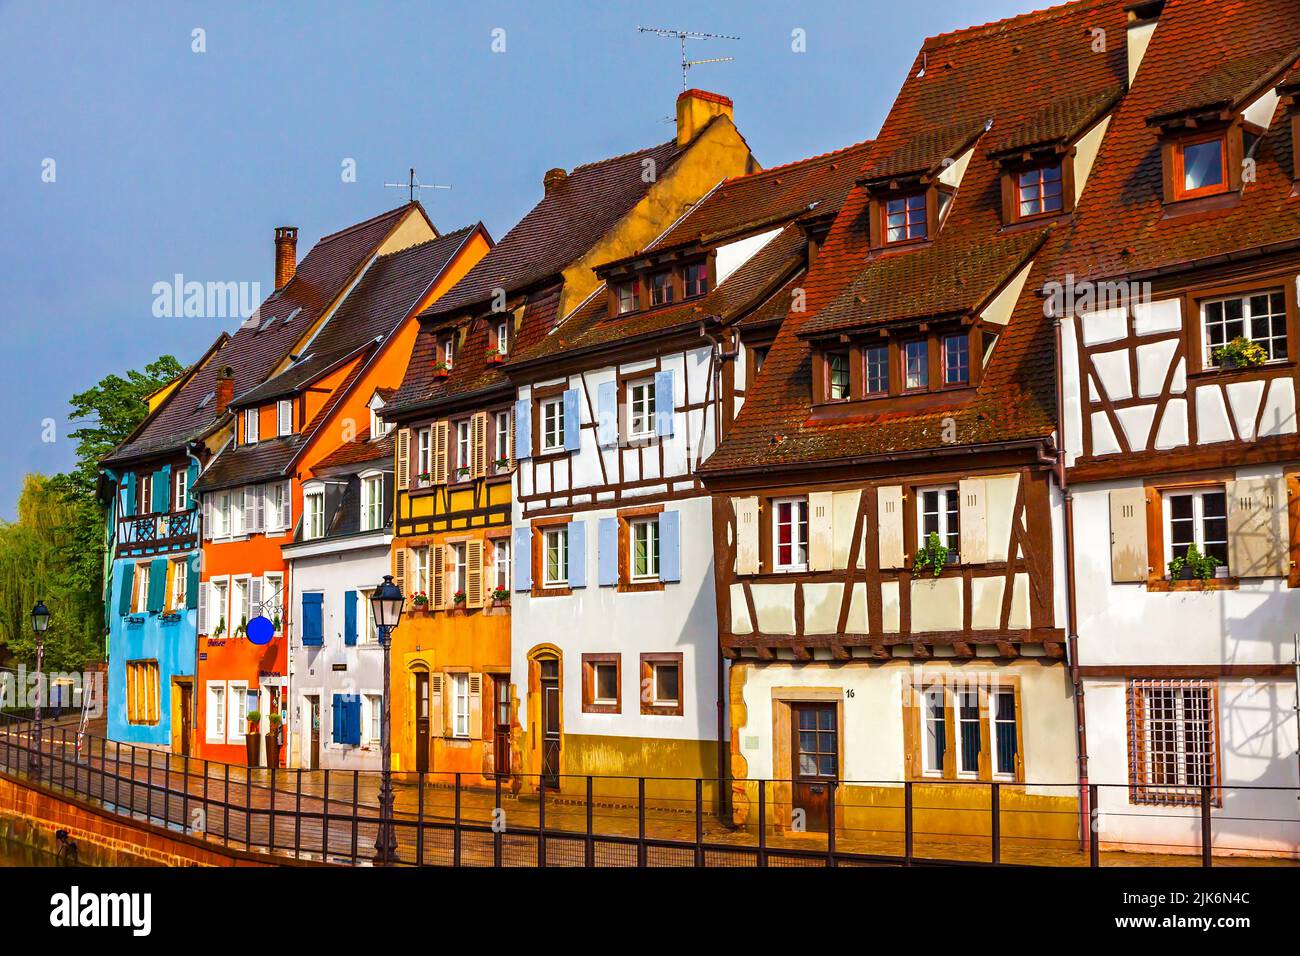 Colourful traditional half-timbered houses on the Quai de la Poissonnerie (The Fishmonger's Quay) in Colmar, France Stock Photo